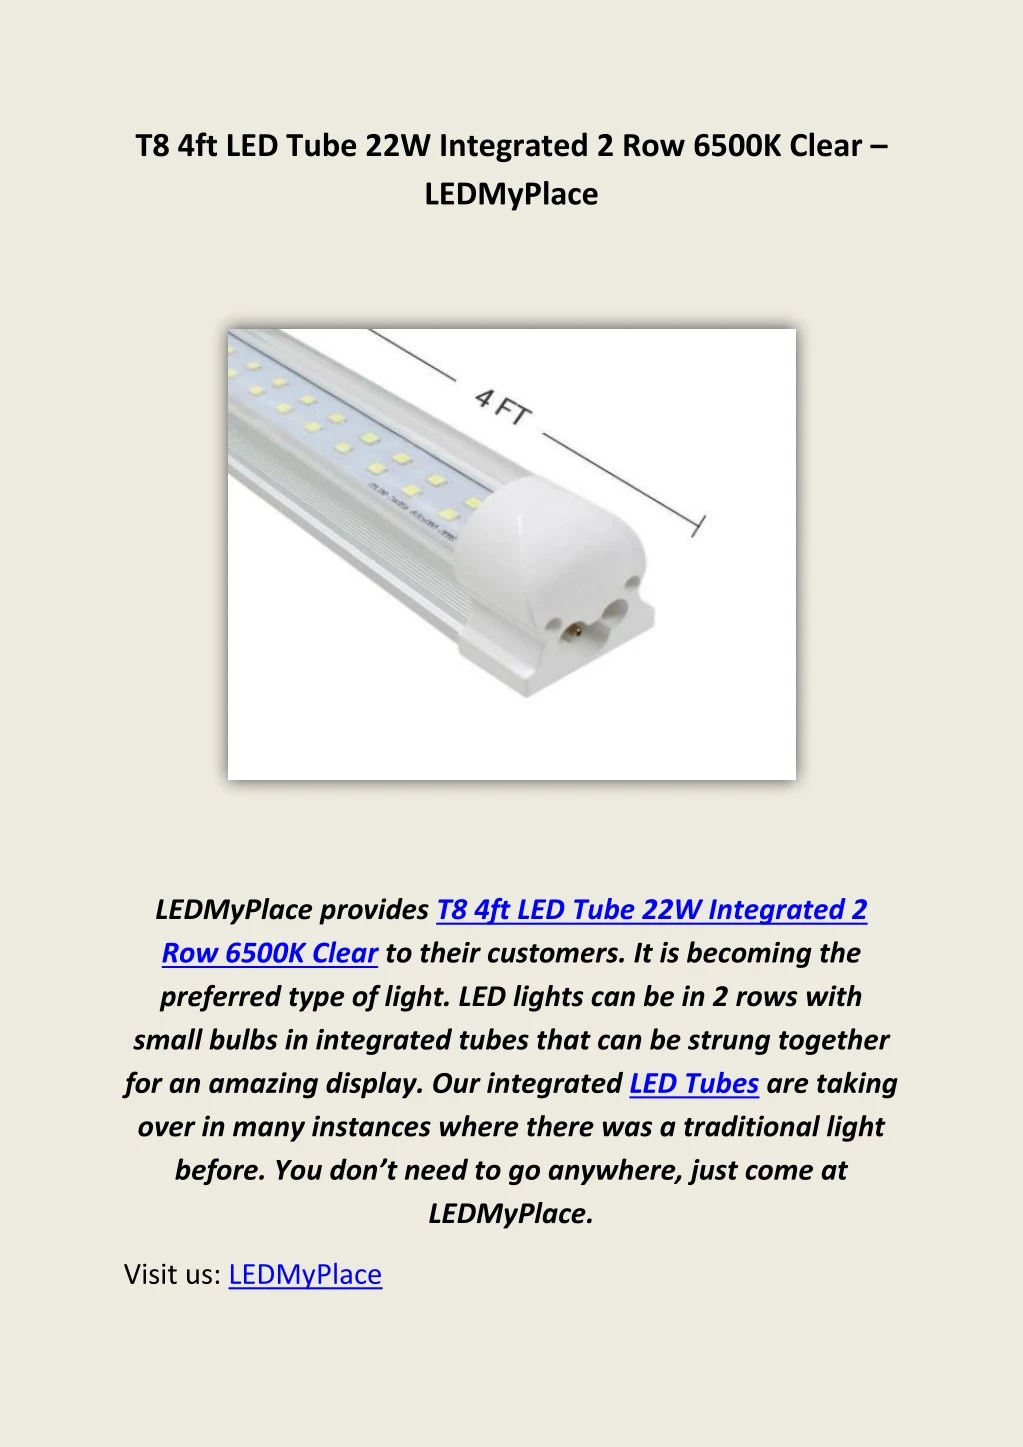 t8 4ft led tube 22w integrated 2 row 6500k clear